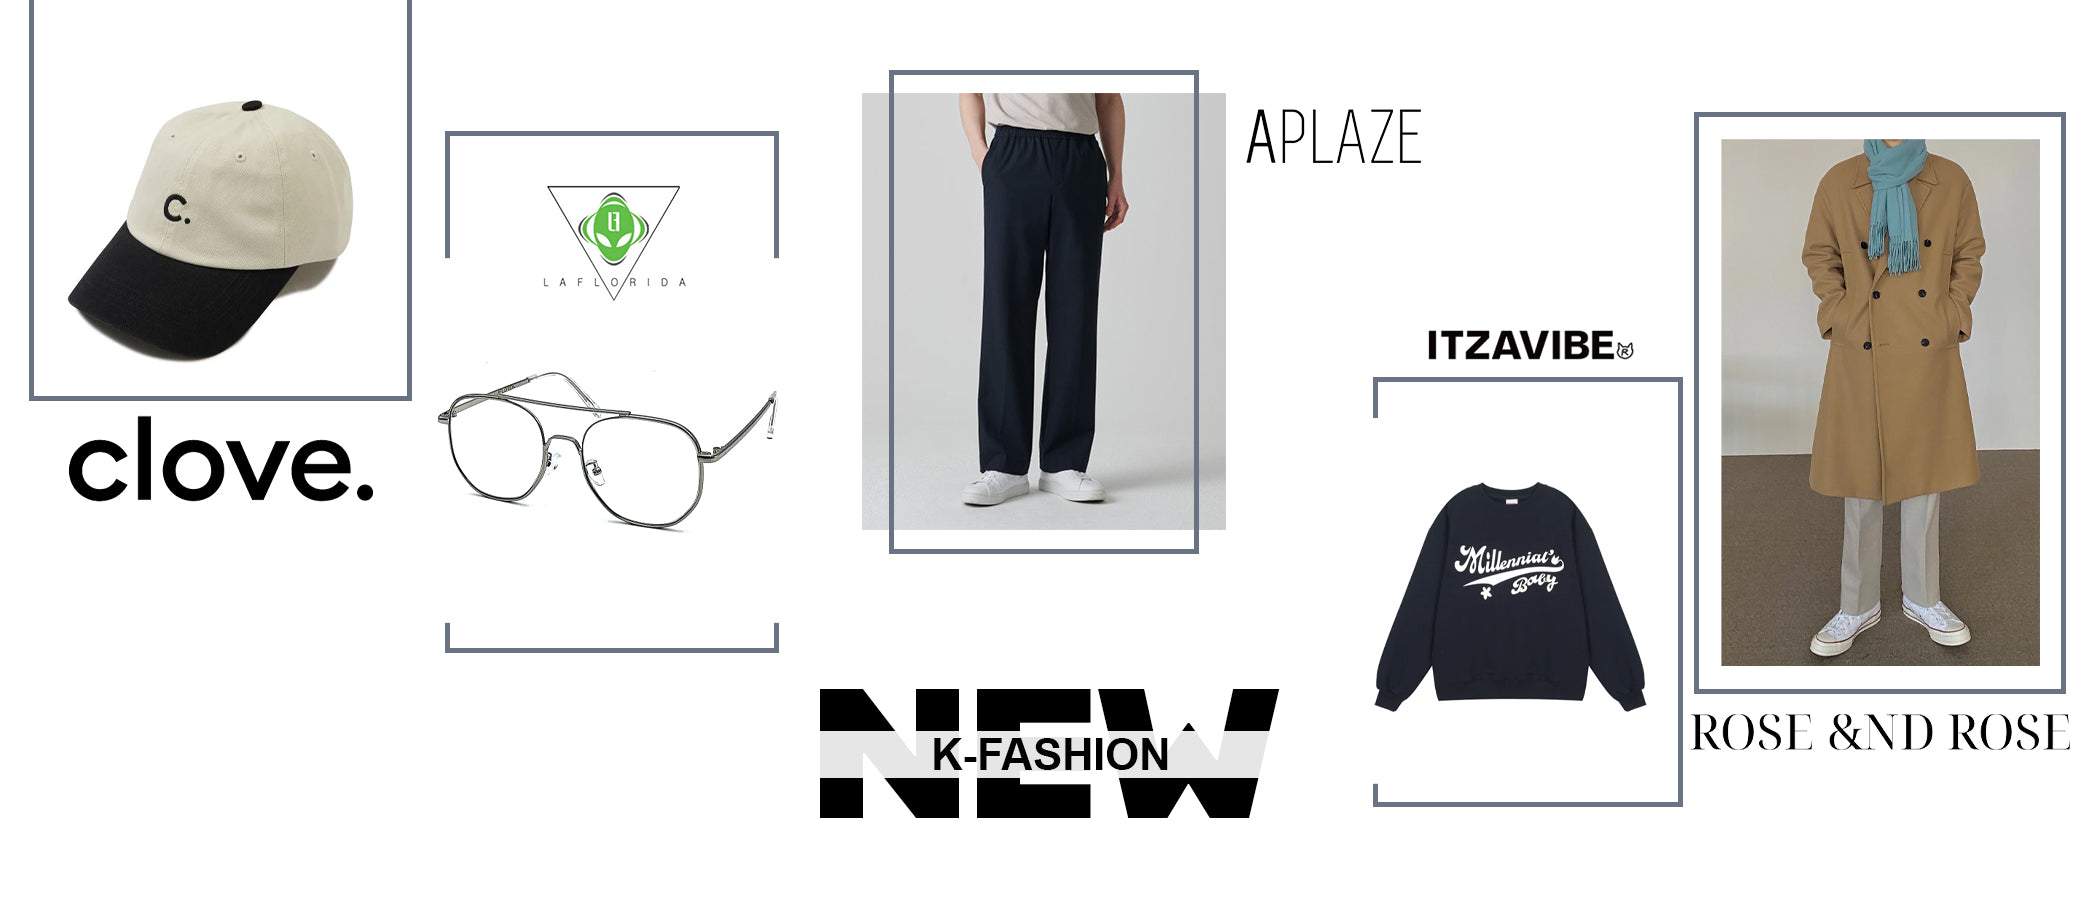 APLAZE Official Site | Online Clothing, Shoes & More